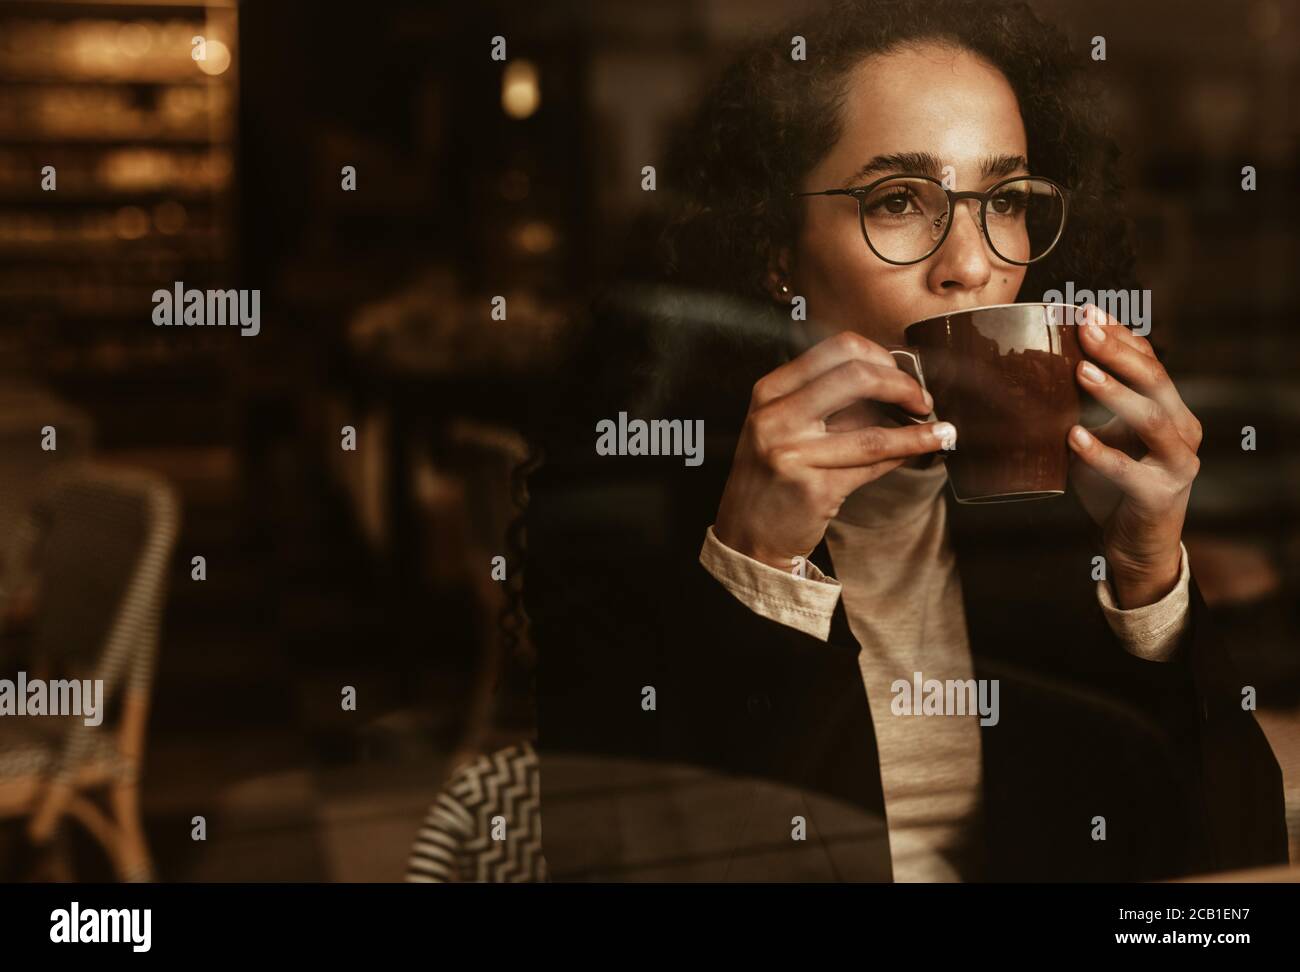 Woman wearing glasses drinking coffee and looking away. Female sitting inside cafe having a cup of coffee. Stock Photo